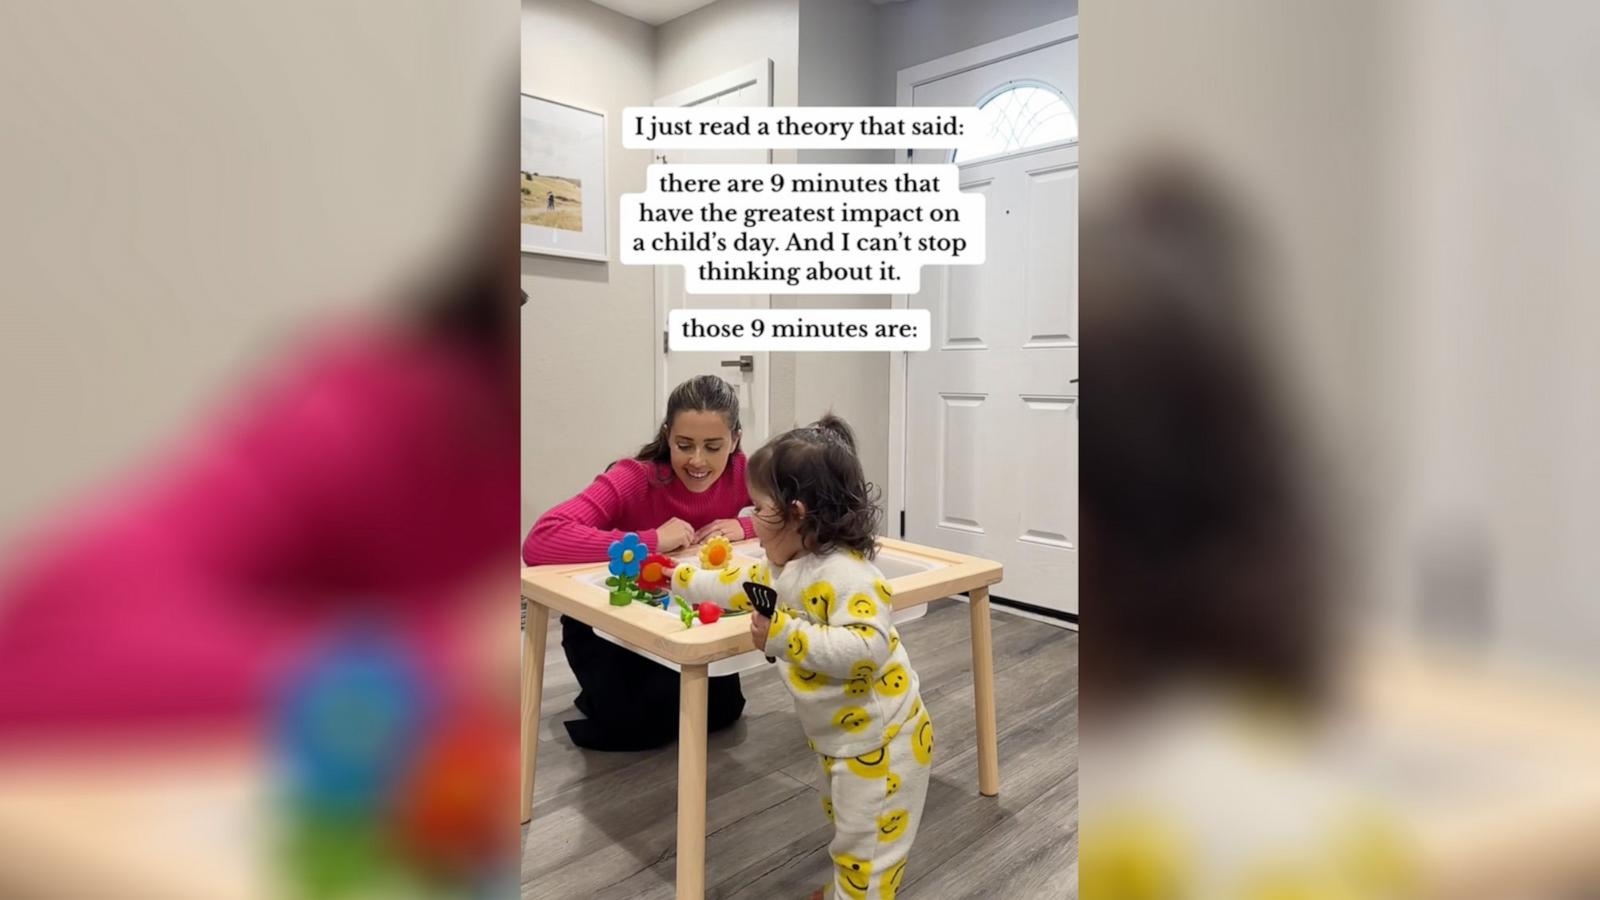 PHOTO: Sara Martinez, a mom in California, shared on TikTok about a theory on the nine most important minutes of a child's day.